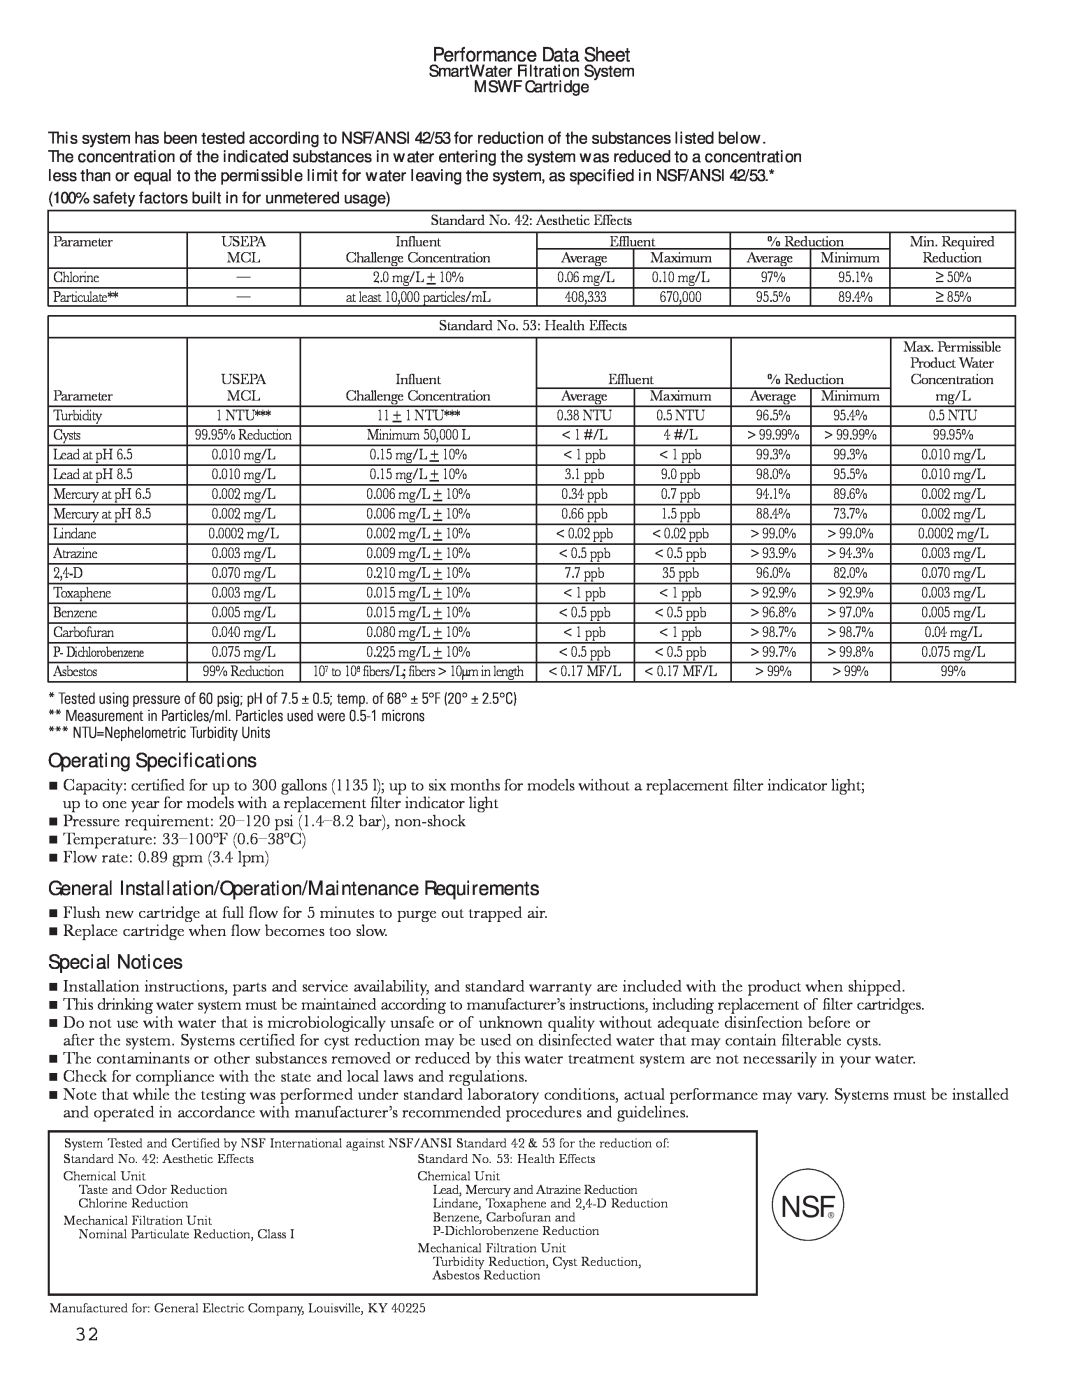 GE 200D8074P044 installation instructions Performance Data Sheet, Operating Specifications, Special Notices 